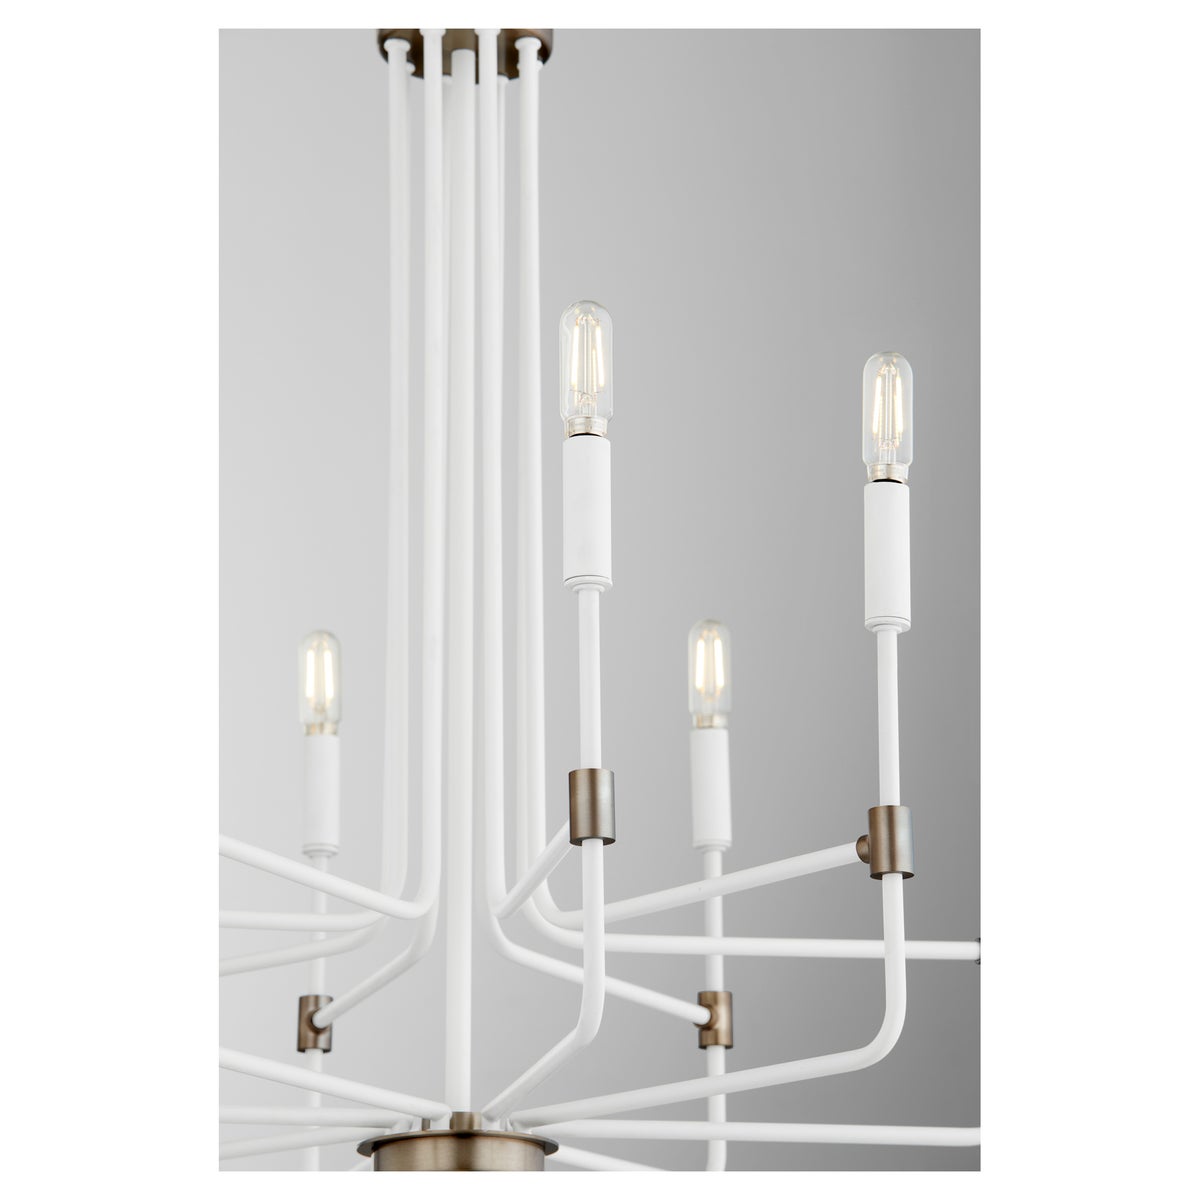 Dining Room Chandelier with modern design and parallel arms, perfect for any environment. 8 bulbs, 60W, dimmable. UL Listed, 2-year warranty.